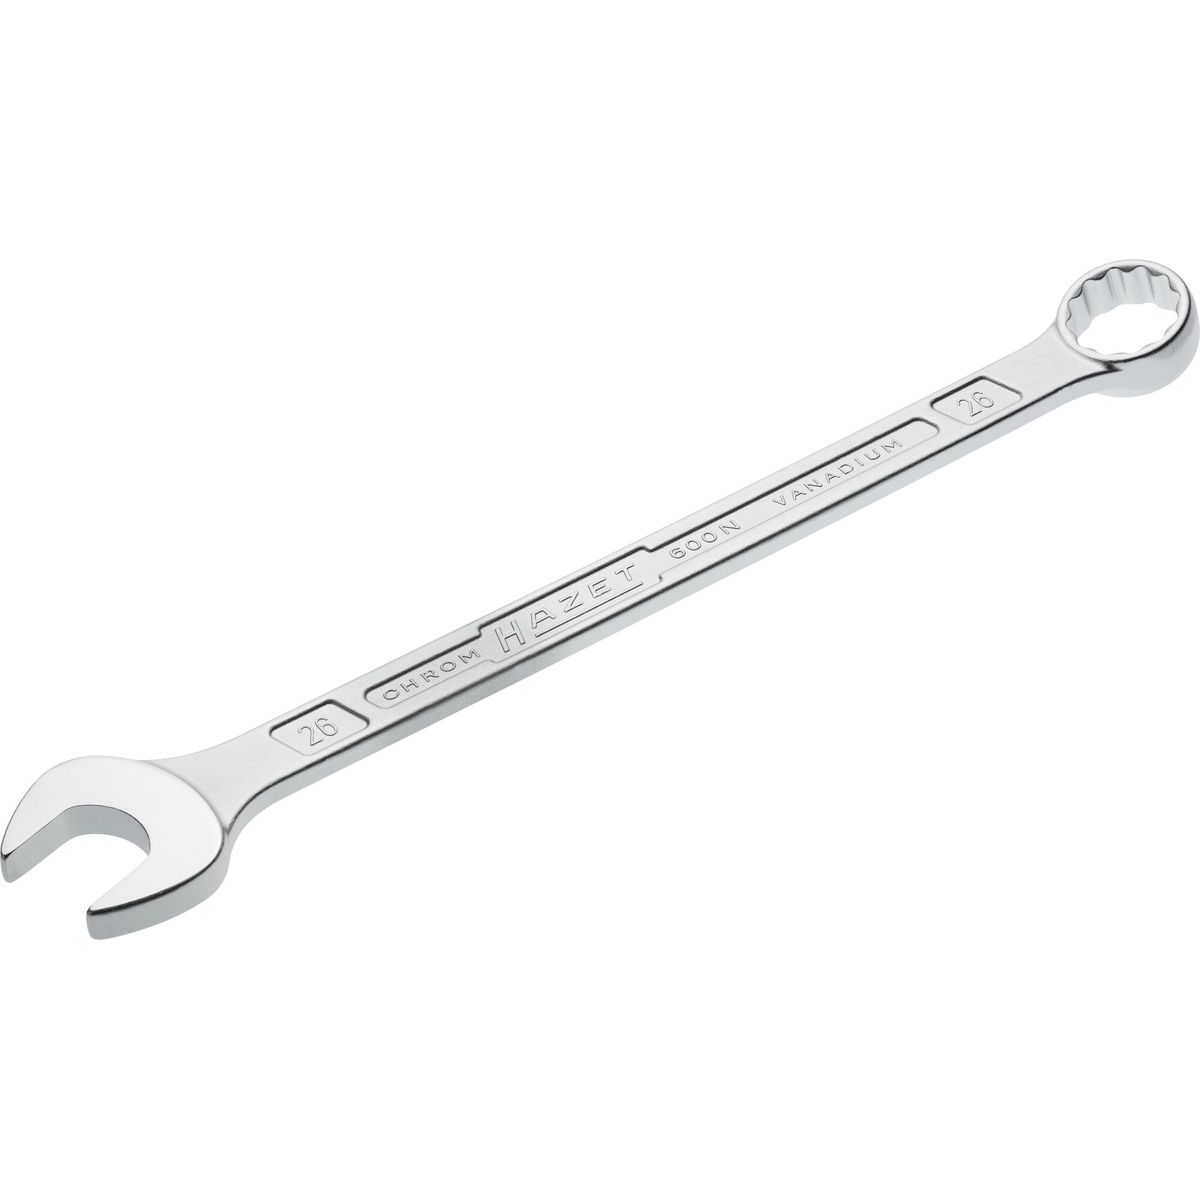 Combination Wrench No.600N-26 Hazet®